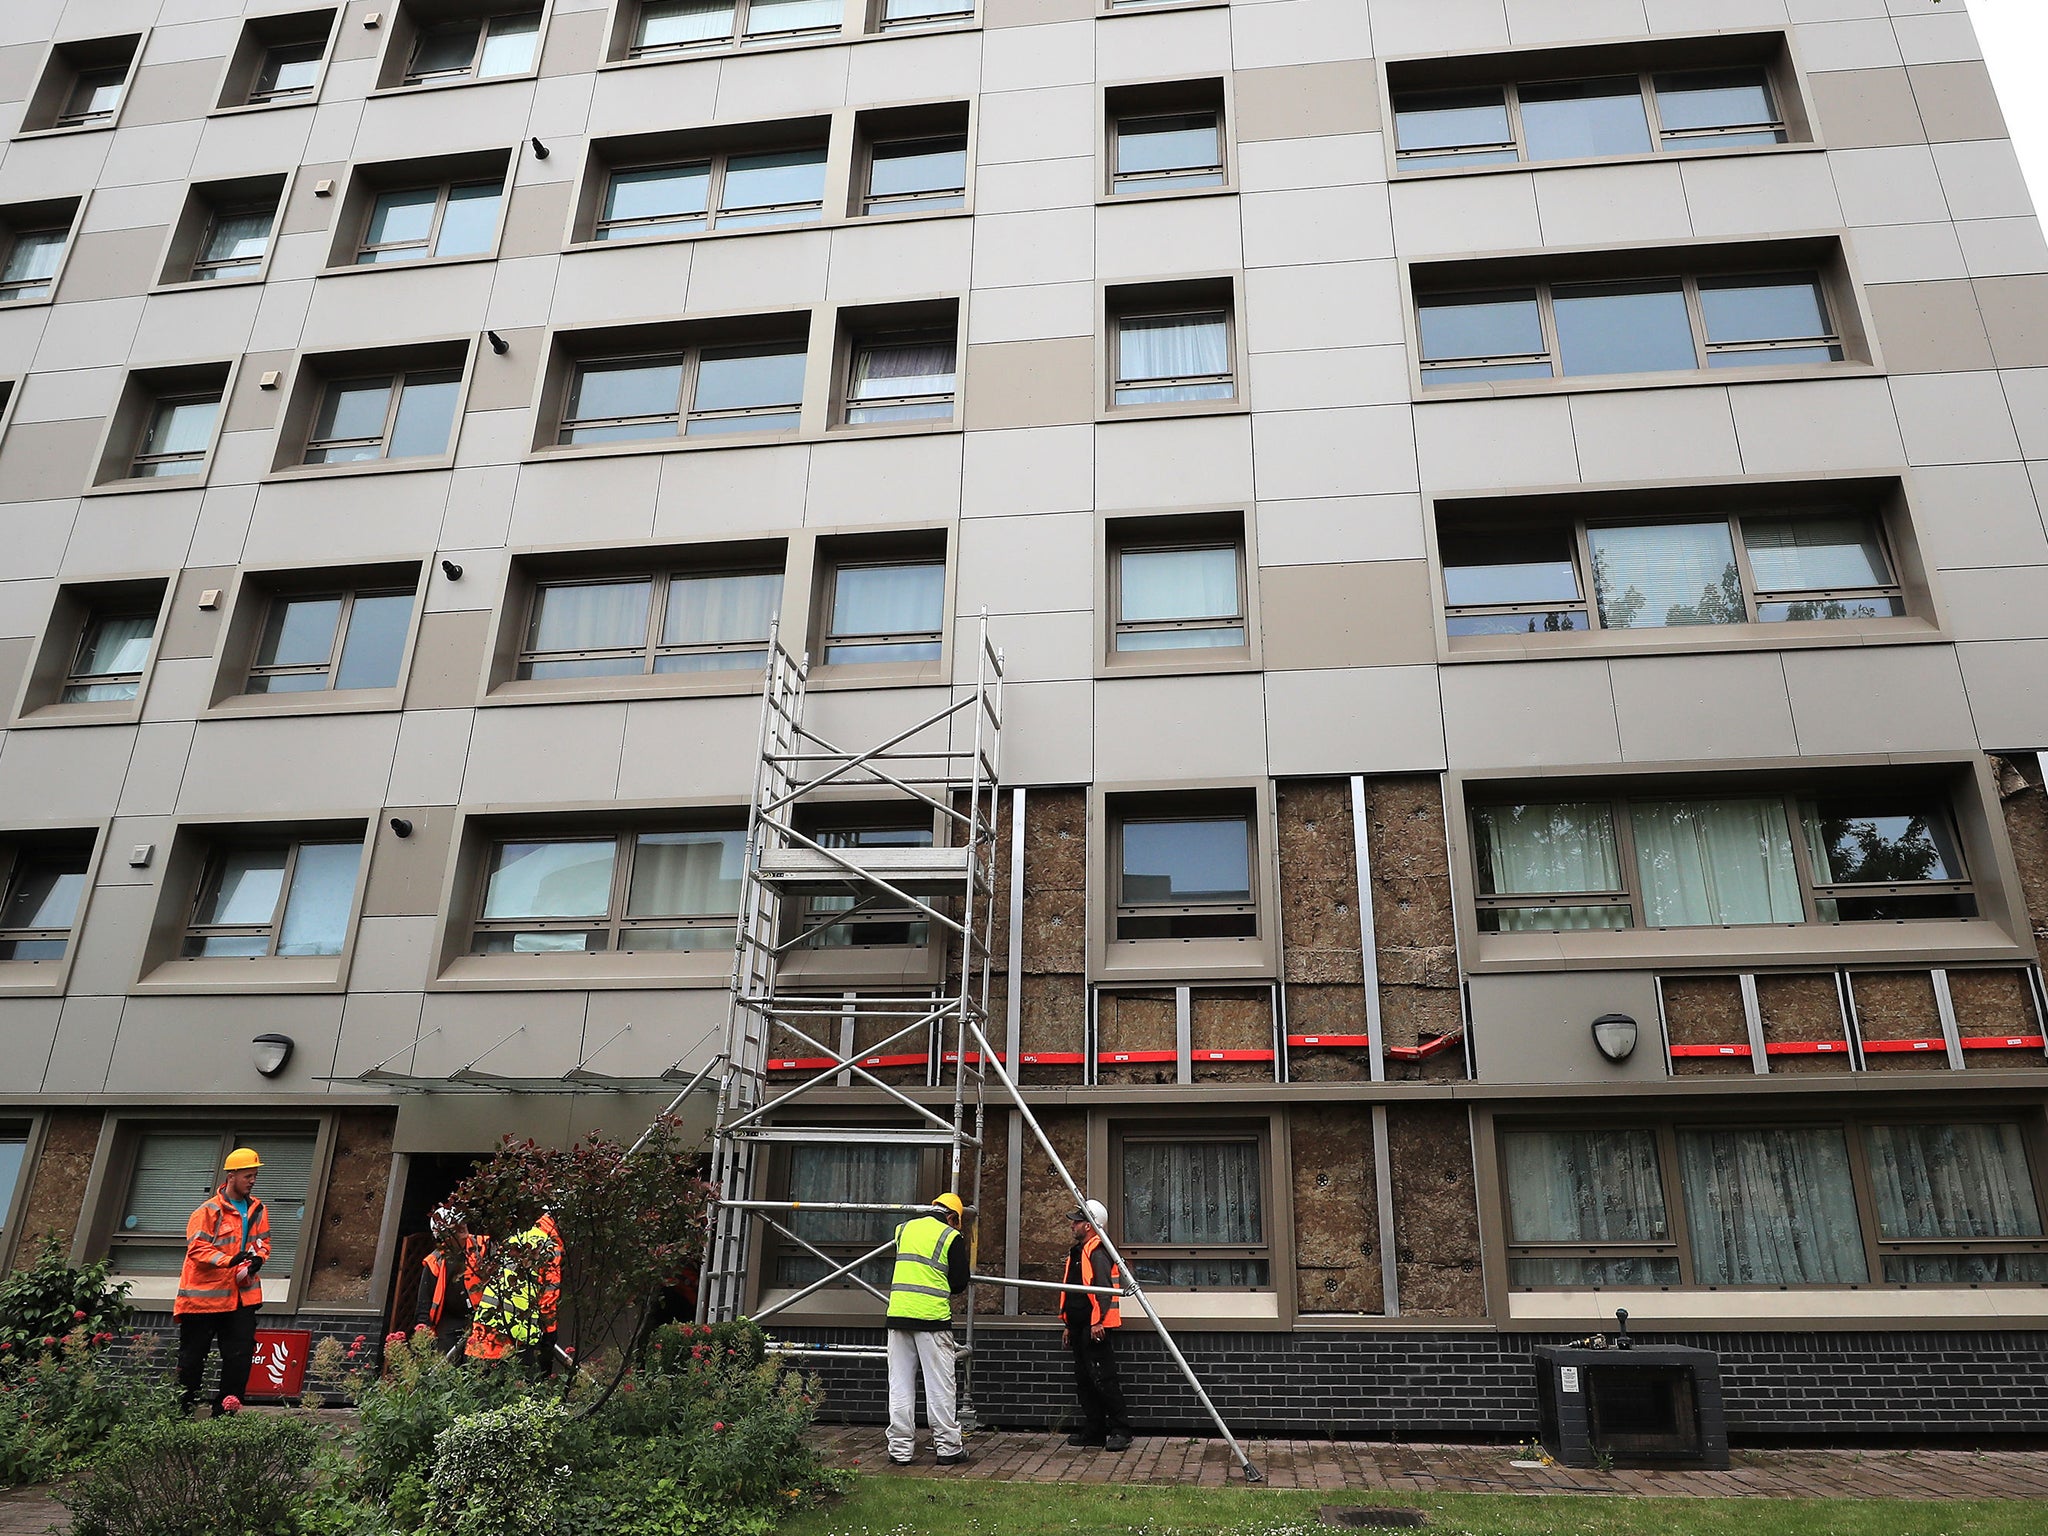 A further 460 social housing blocks are set to be tested but fears were growing that the true figure of unsafe blocks could be far higher, with private residential high rises also affected